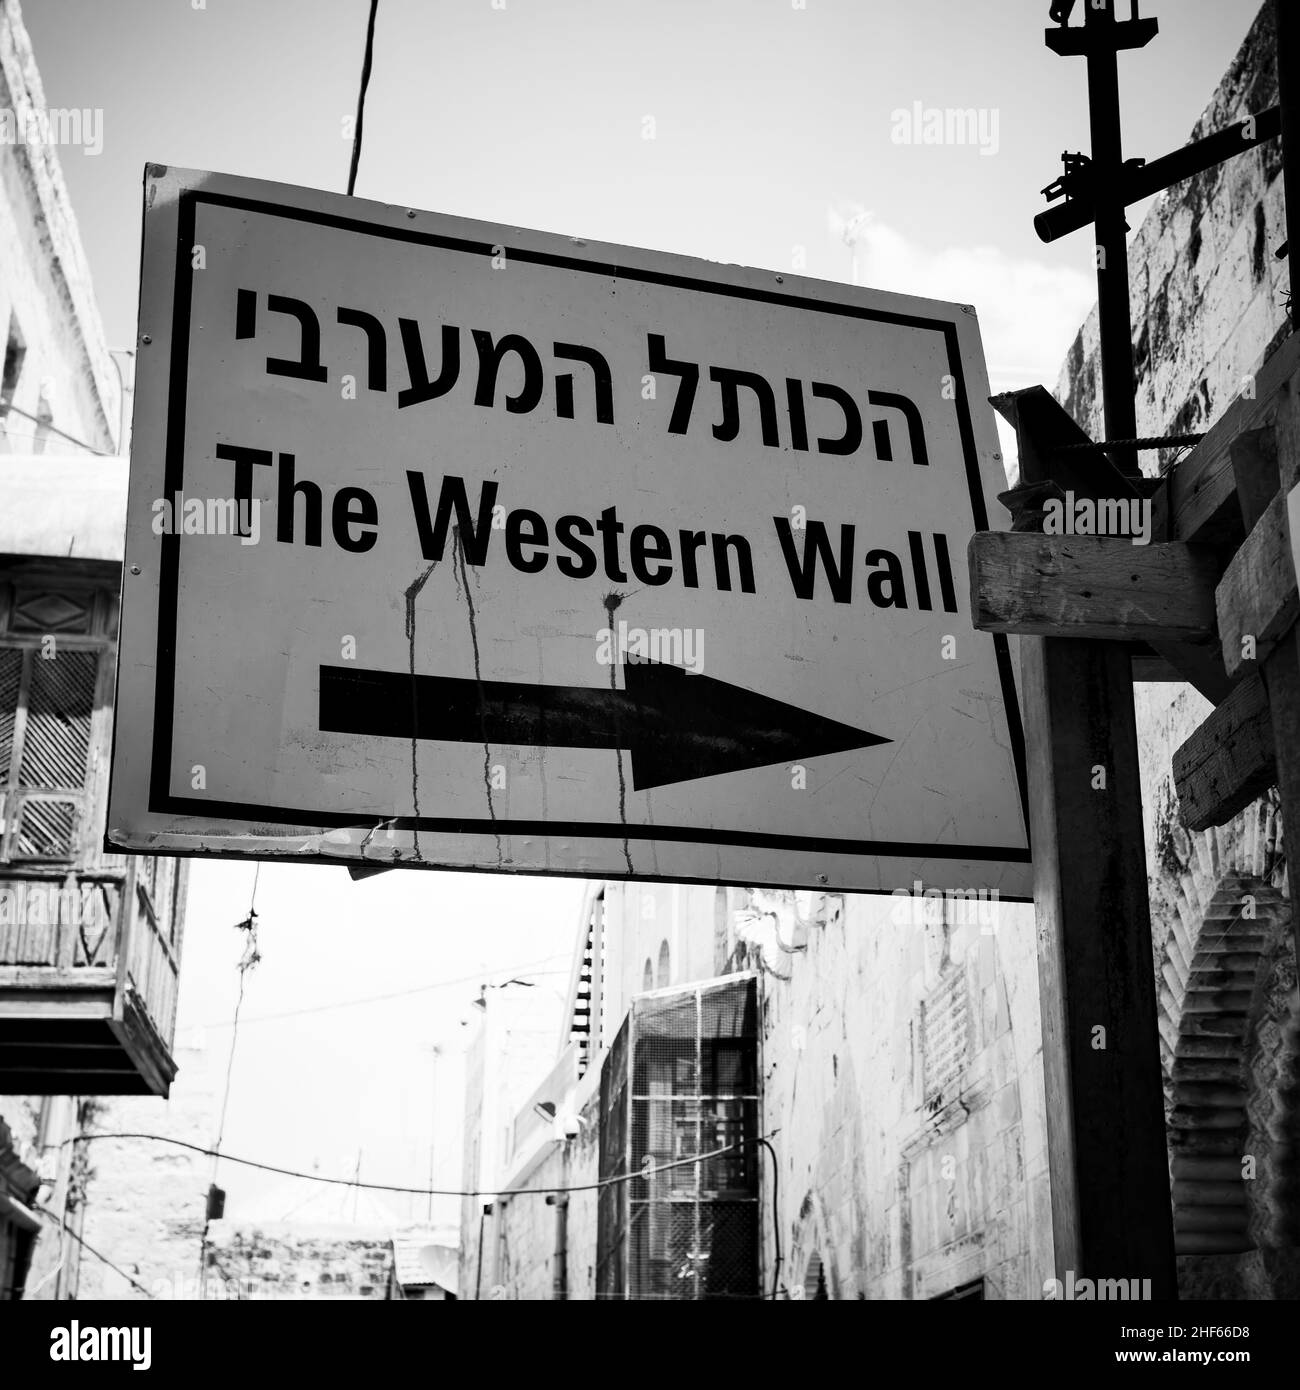 Western Wall direction sign in the street in The Old Town of Jerusalem, Israel. Black and white photography Stock Photo